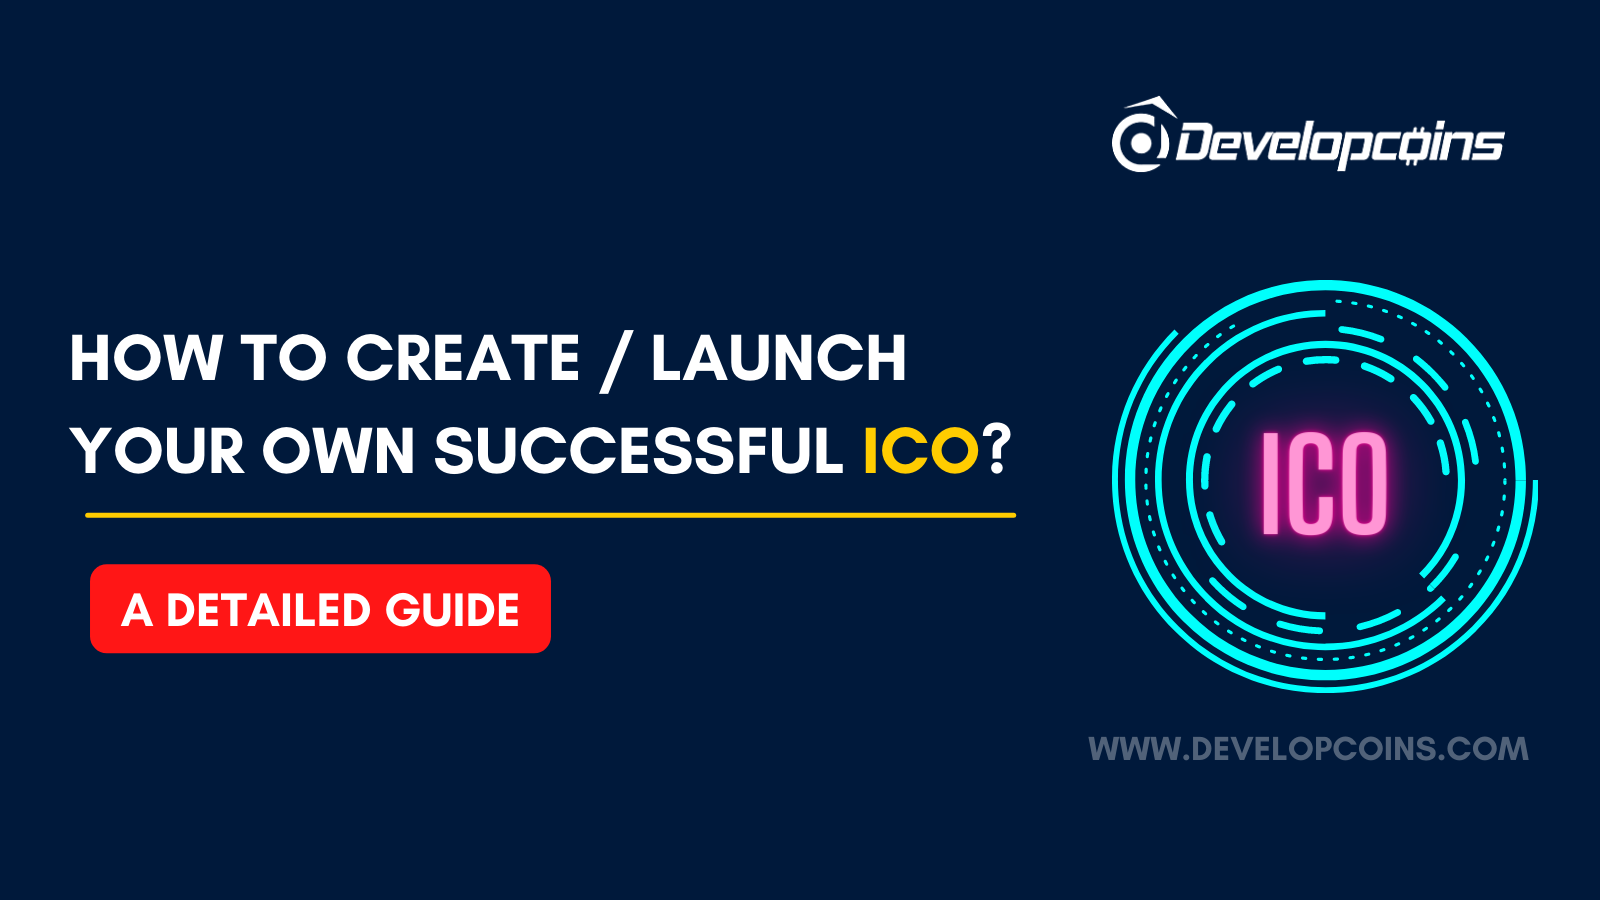 How to Create / Launch Your Own Successful ICO?